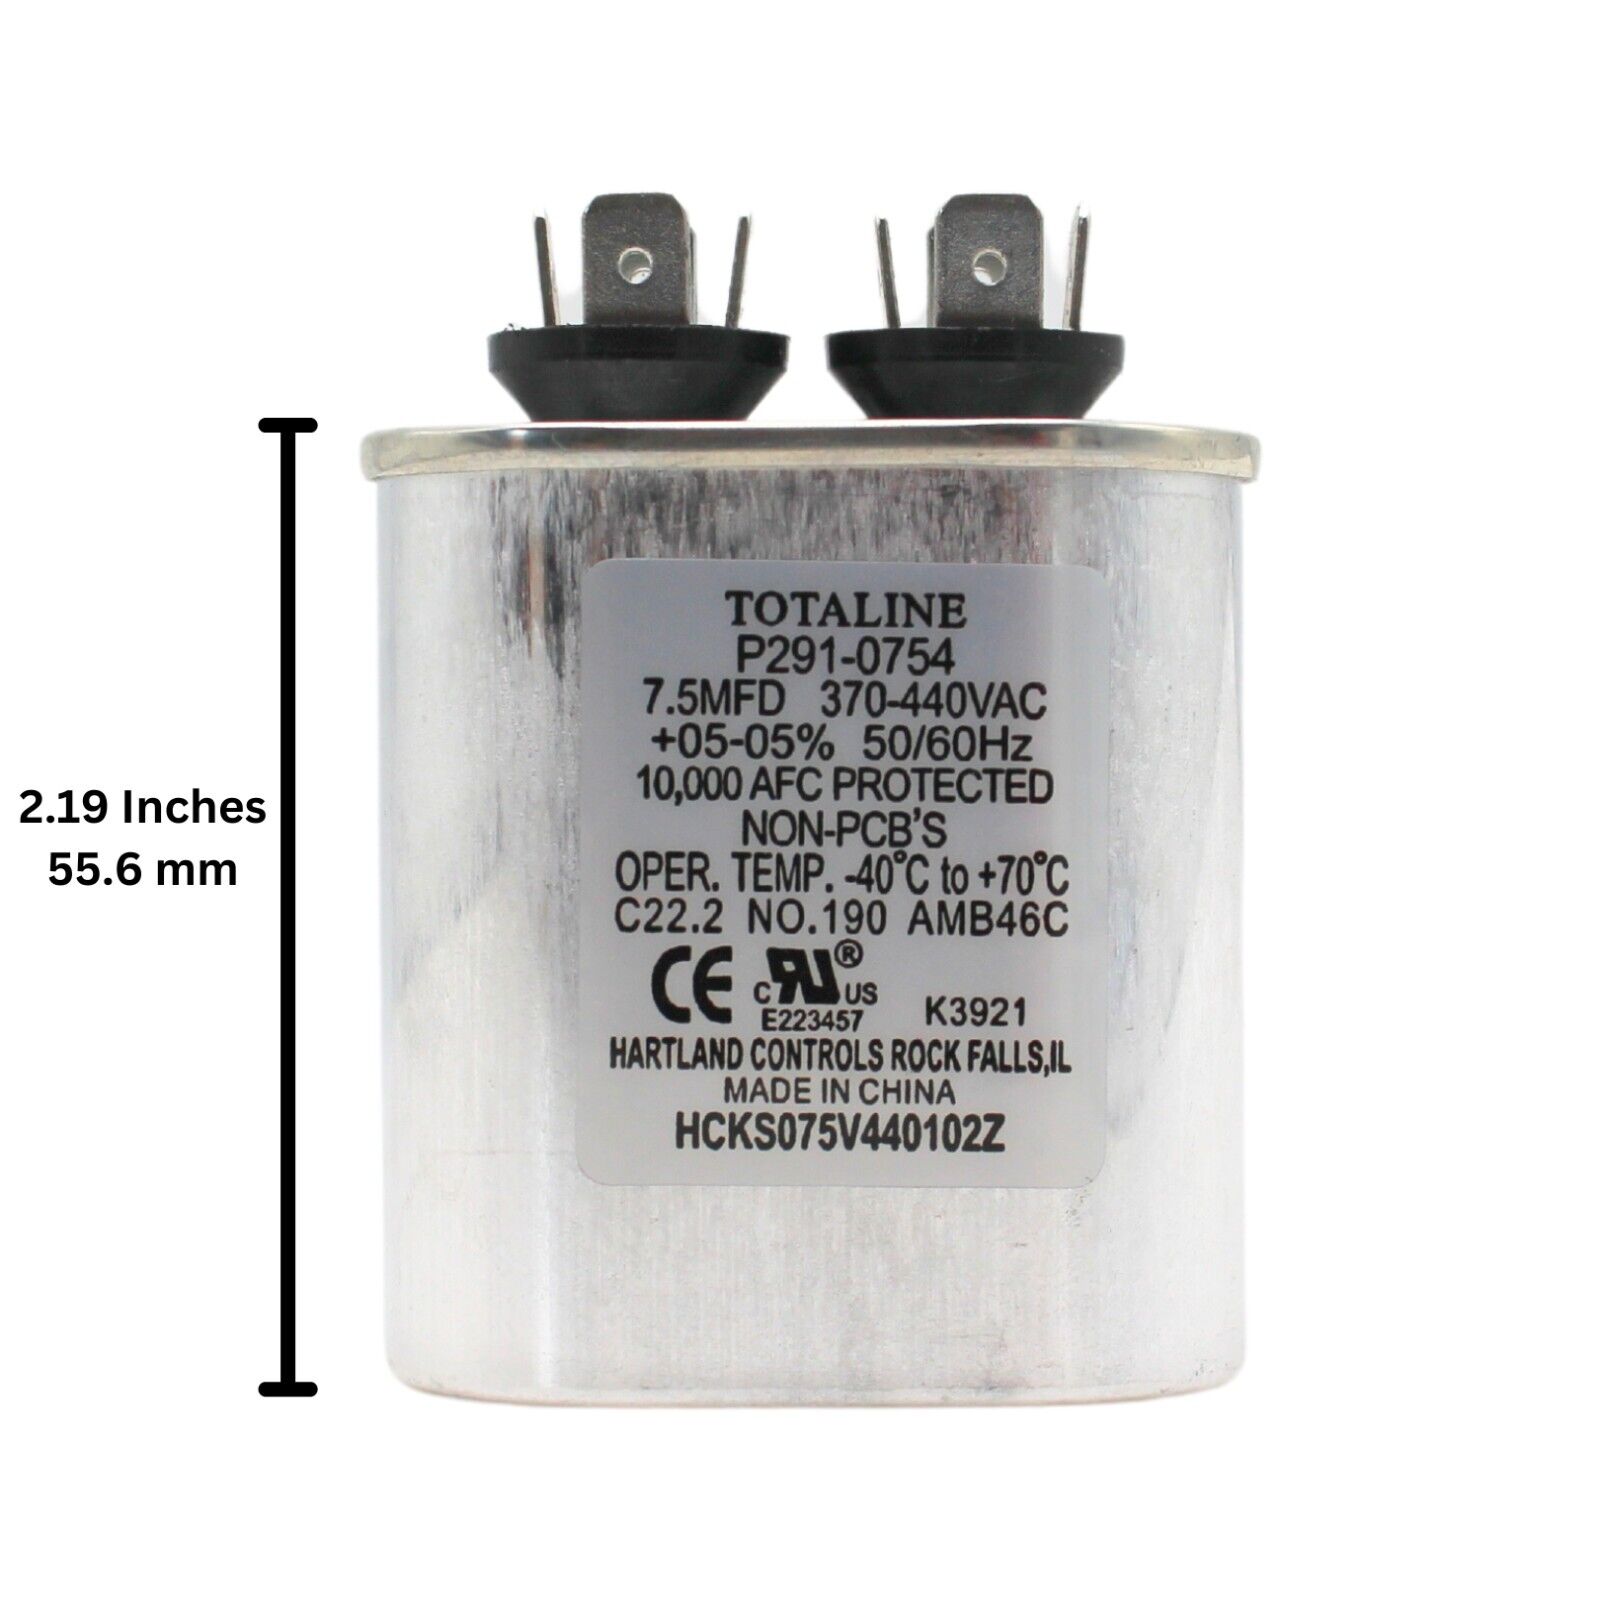 Totaline by Carrier P291-0754 7.5uF 370/440VAC 50/60HzOval Run Start Capacitor